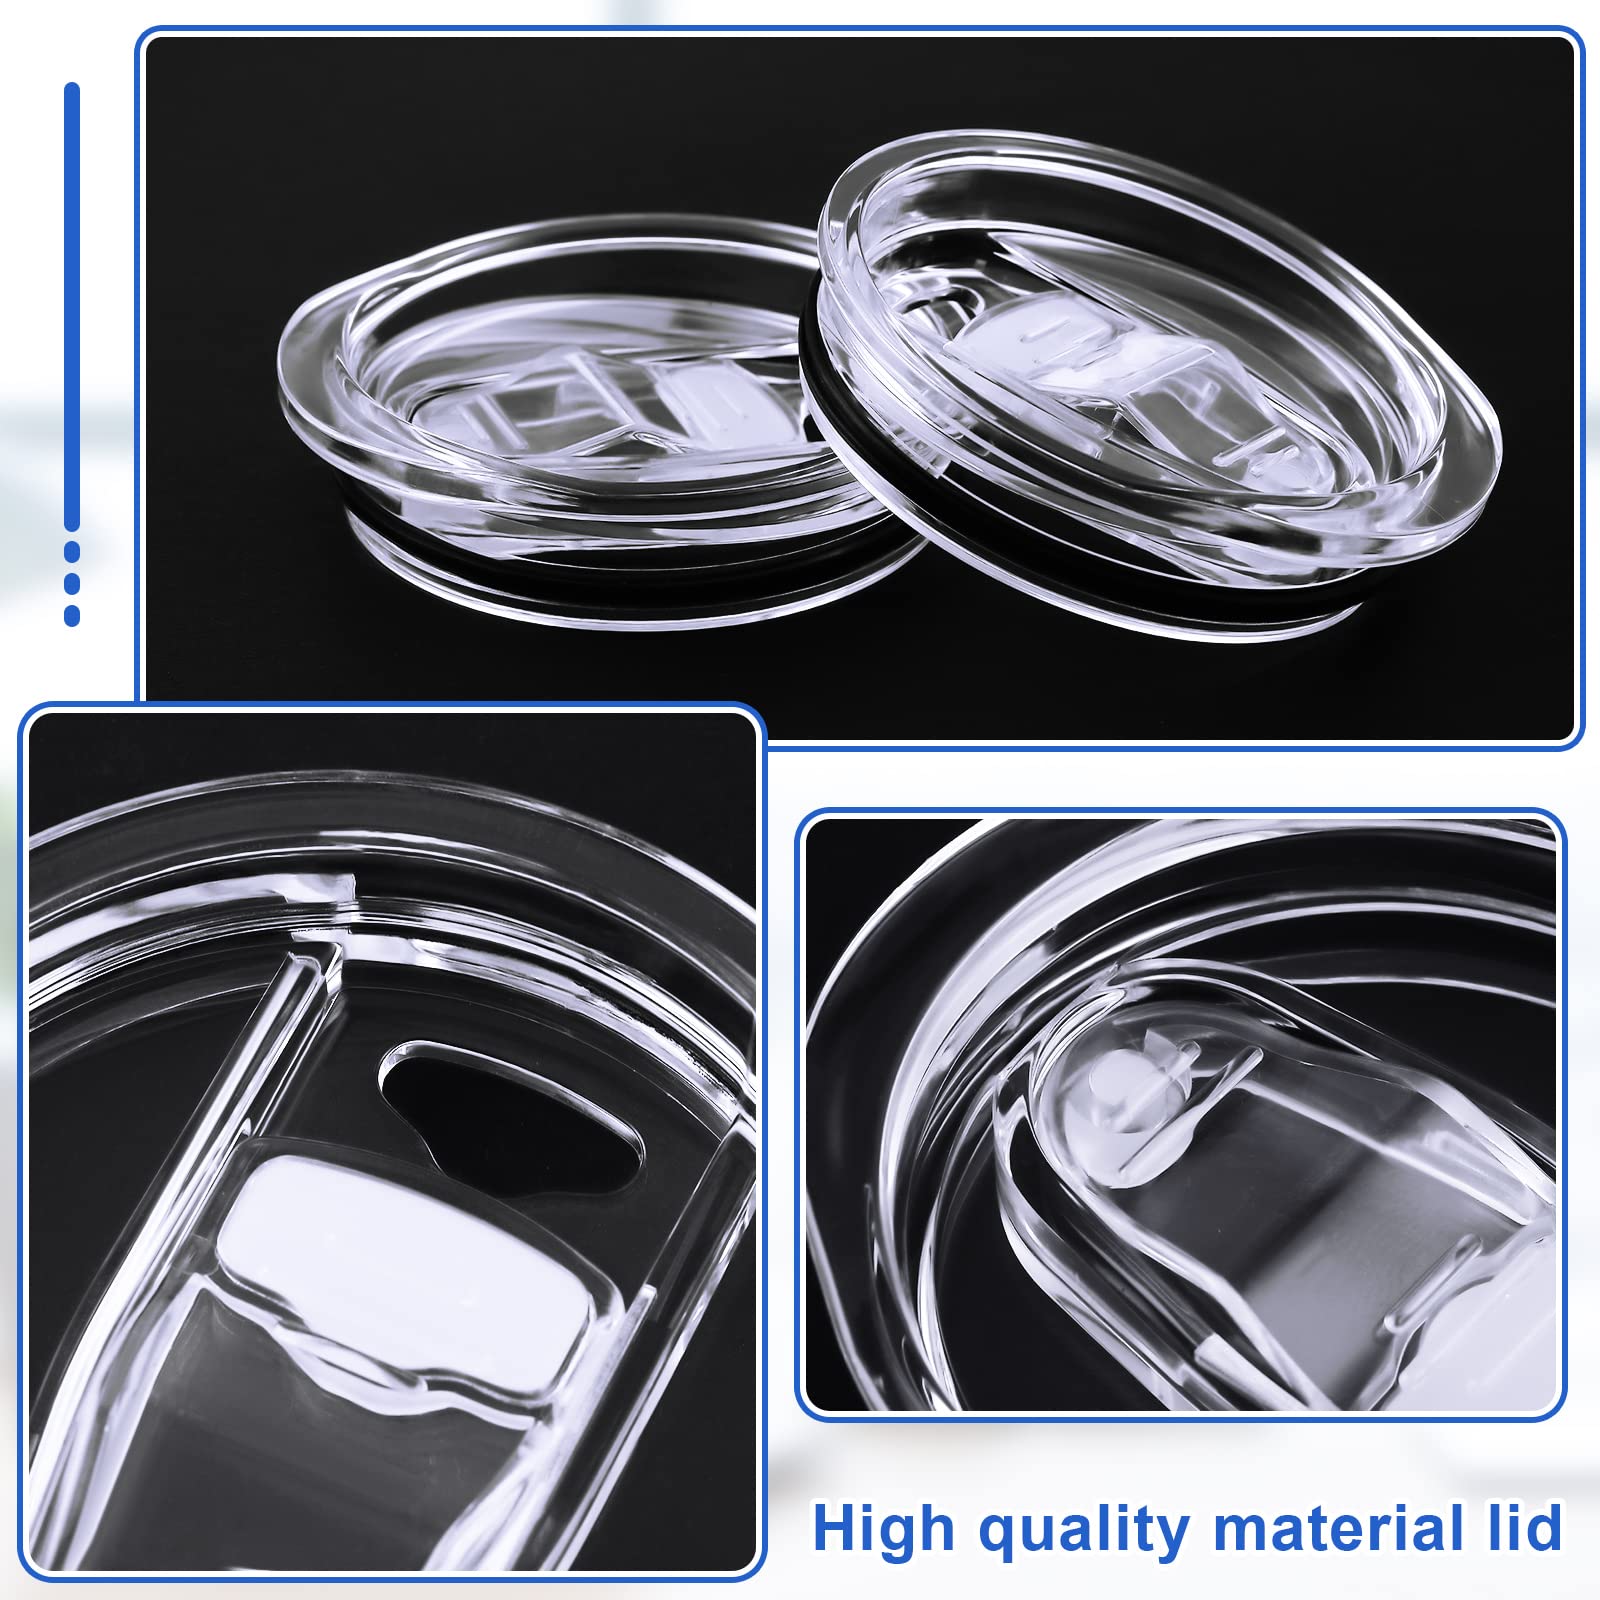 Skinny Replacement Lids Tumbler Replacement Lids Plastic Splash Resistant Lids Covers Spill Proof Skinny Tumbler Lid Clear Cup Covers for Mouth Tumbler Cooler Cup (5 Pack, 20 oz)